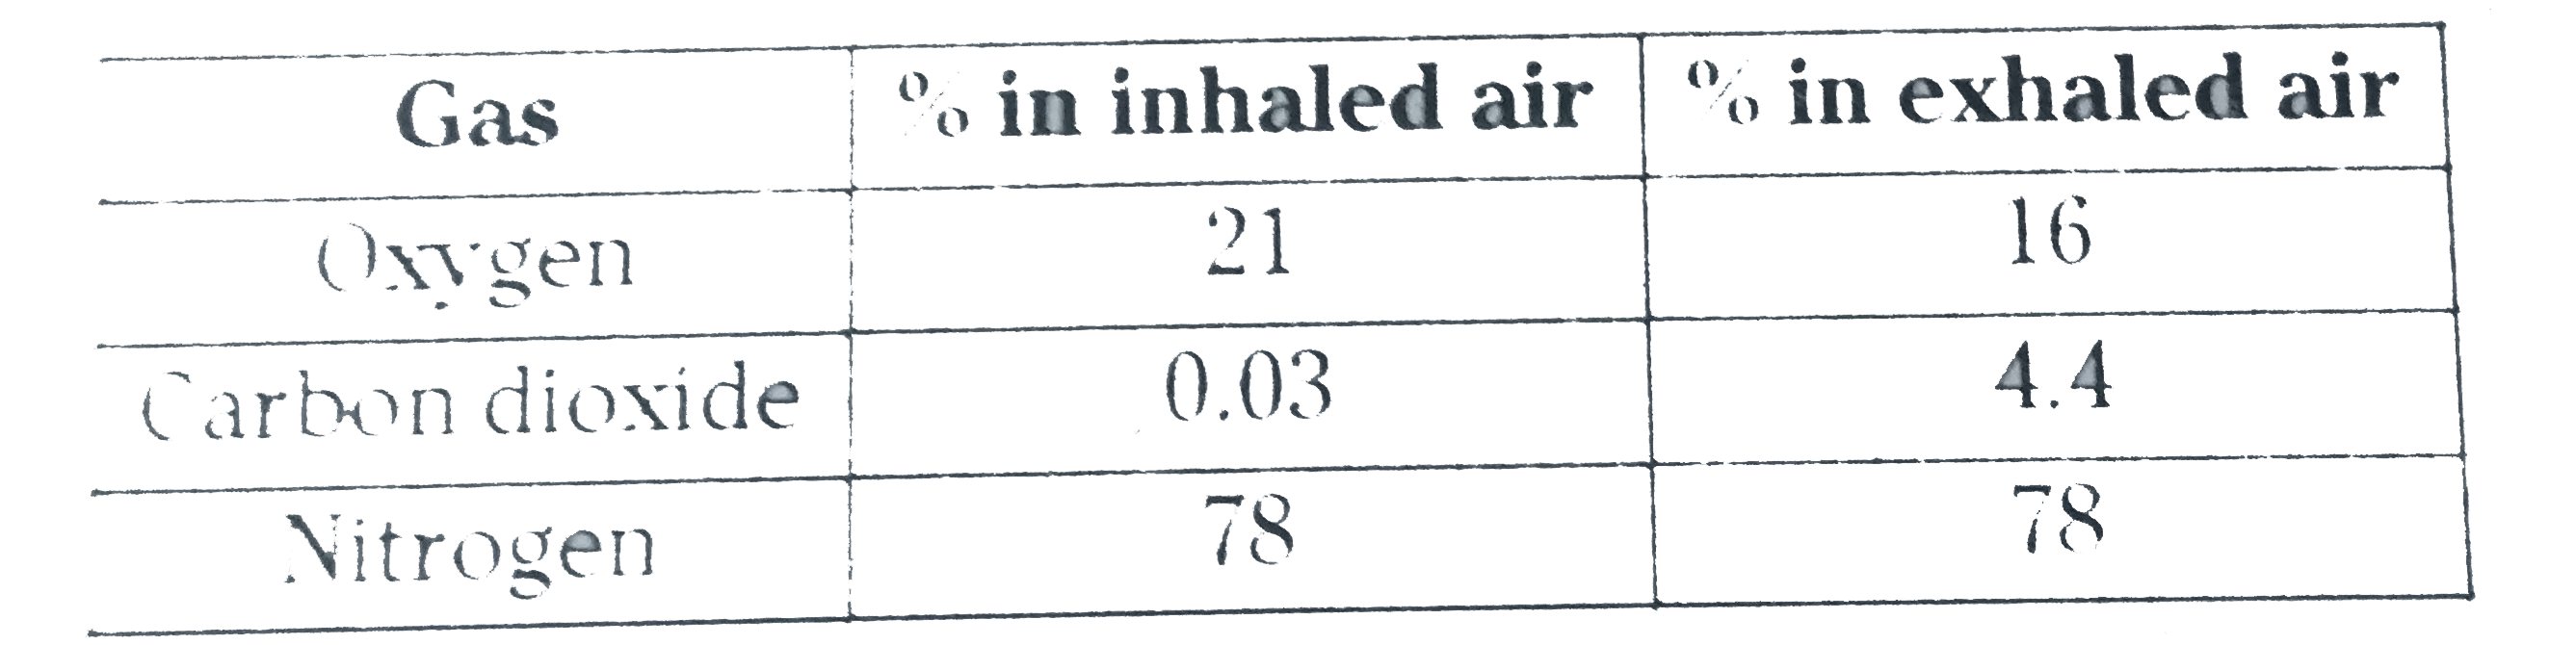 Observe following table and answer the questions given below .       Why there is no change in Nitrogen percentage in exhaled and inhaled air ?